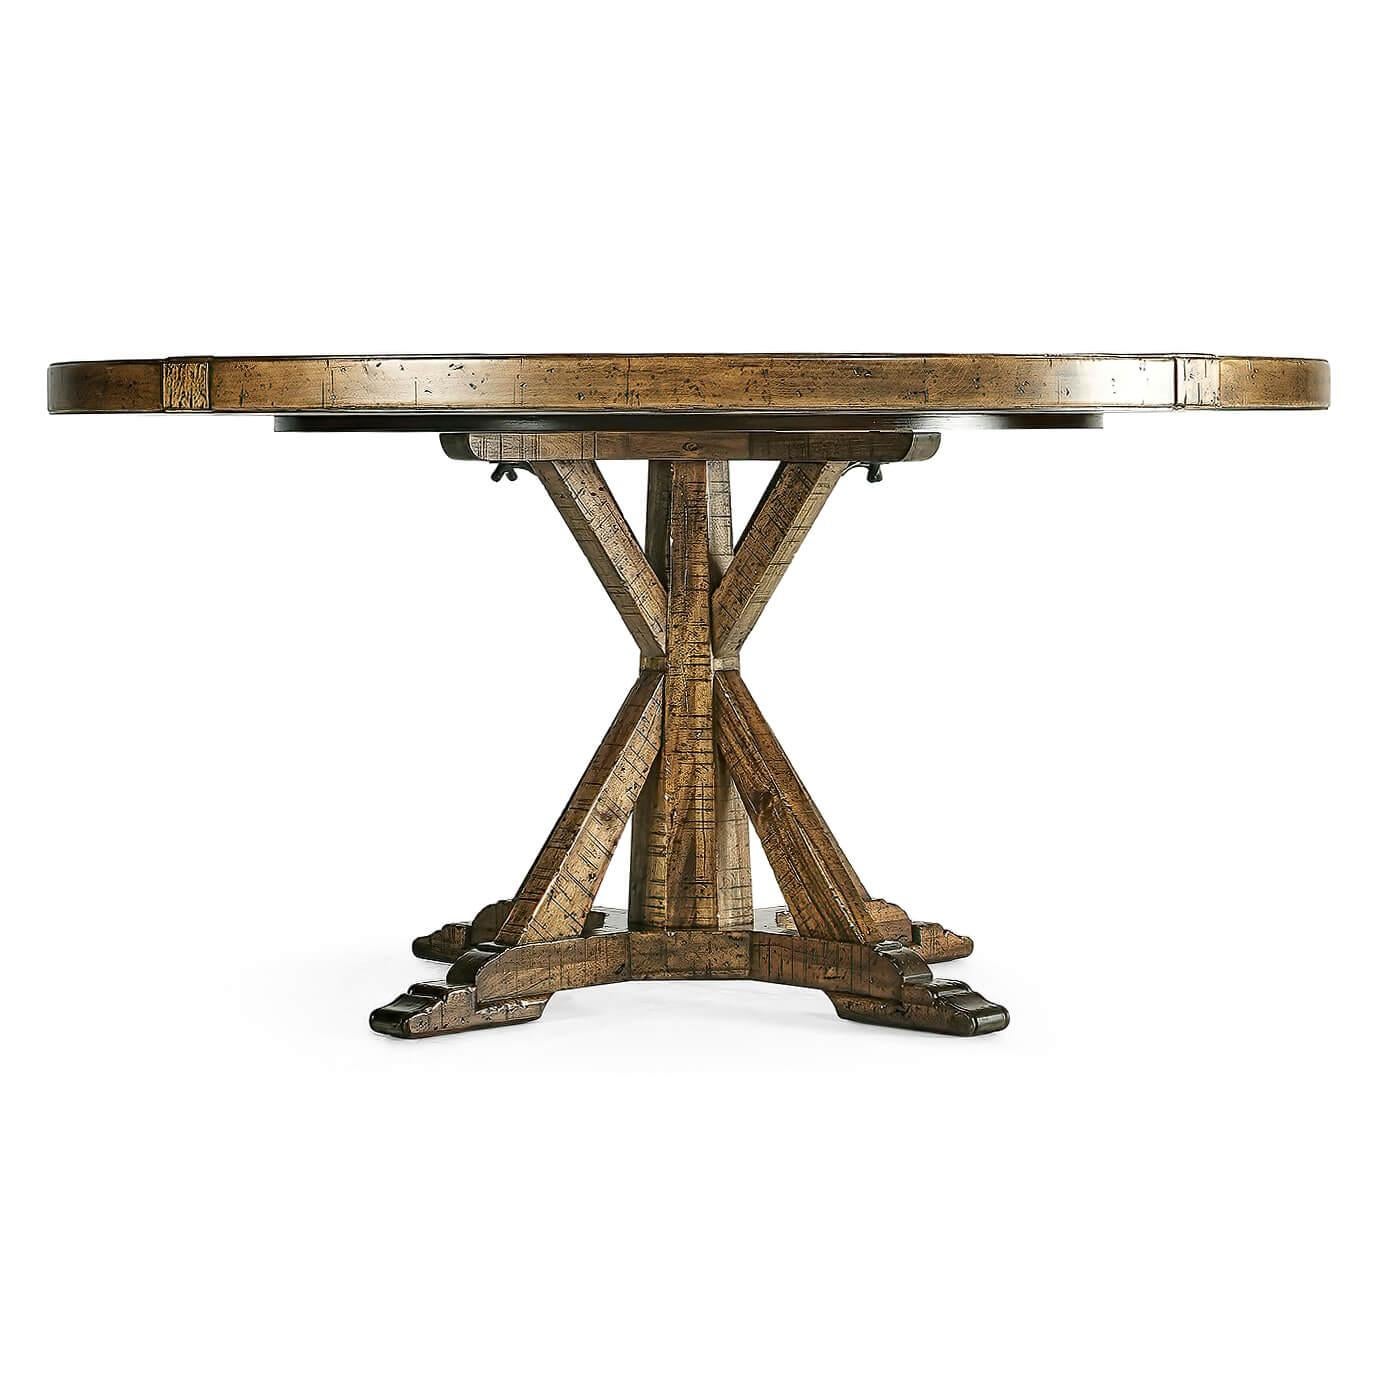 A large round dining table finished in A medium brown color with a rustic finish showing exposed saw marks and set on a bracketed country kitchen base, the table also has a built-in self-storing Lazy Susan.

Dimensions: 60